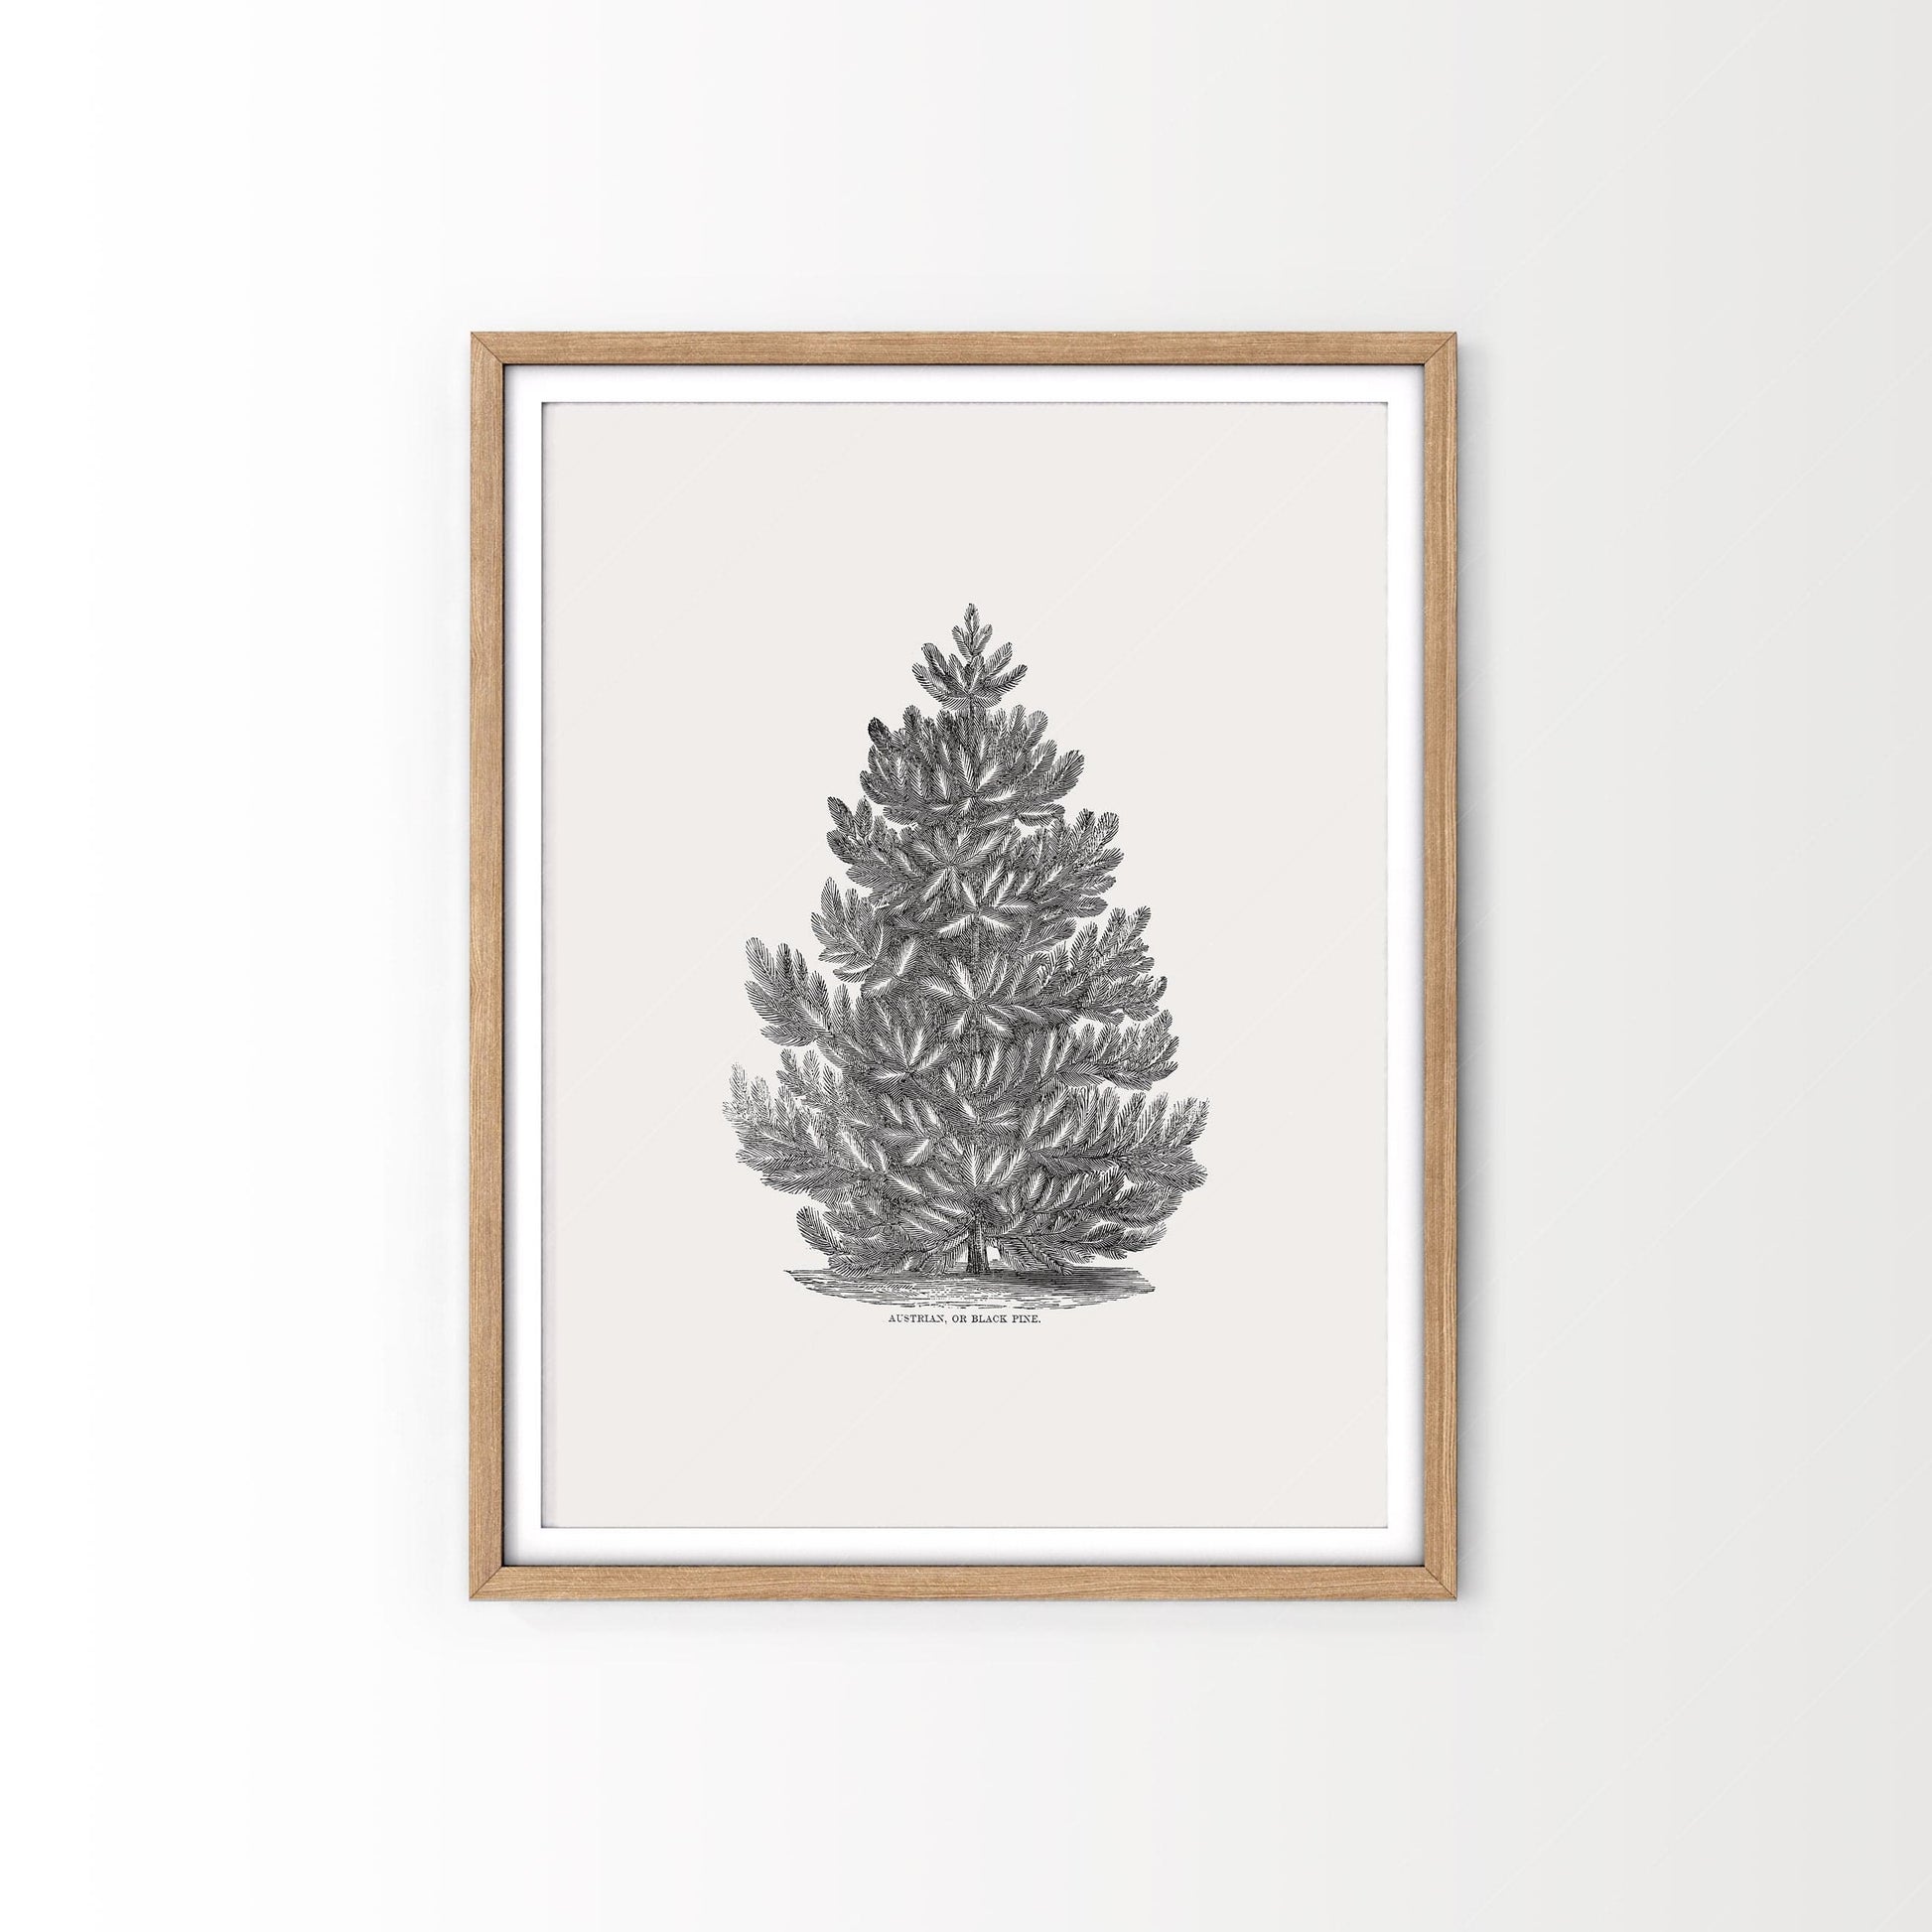 Home Poster Decor Black Pine Tree, Christmas Wall Decor, Forest Poster, Norway Spruce, Botanical Print, Winter Art, Vintage Gift, Nordic Forest, Canada Trees